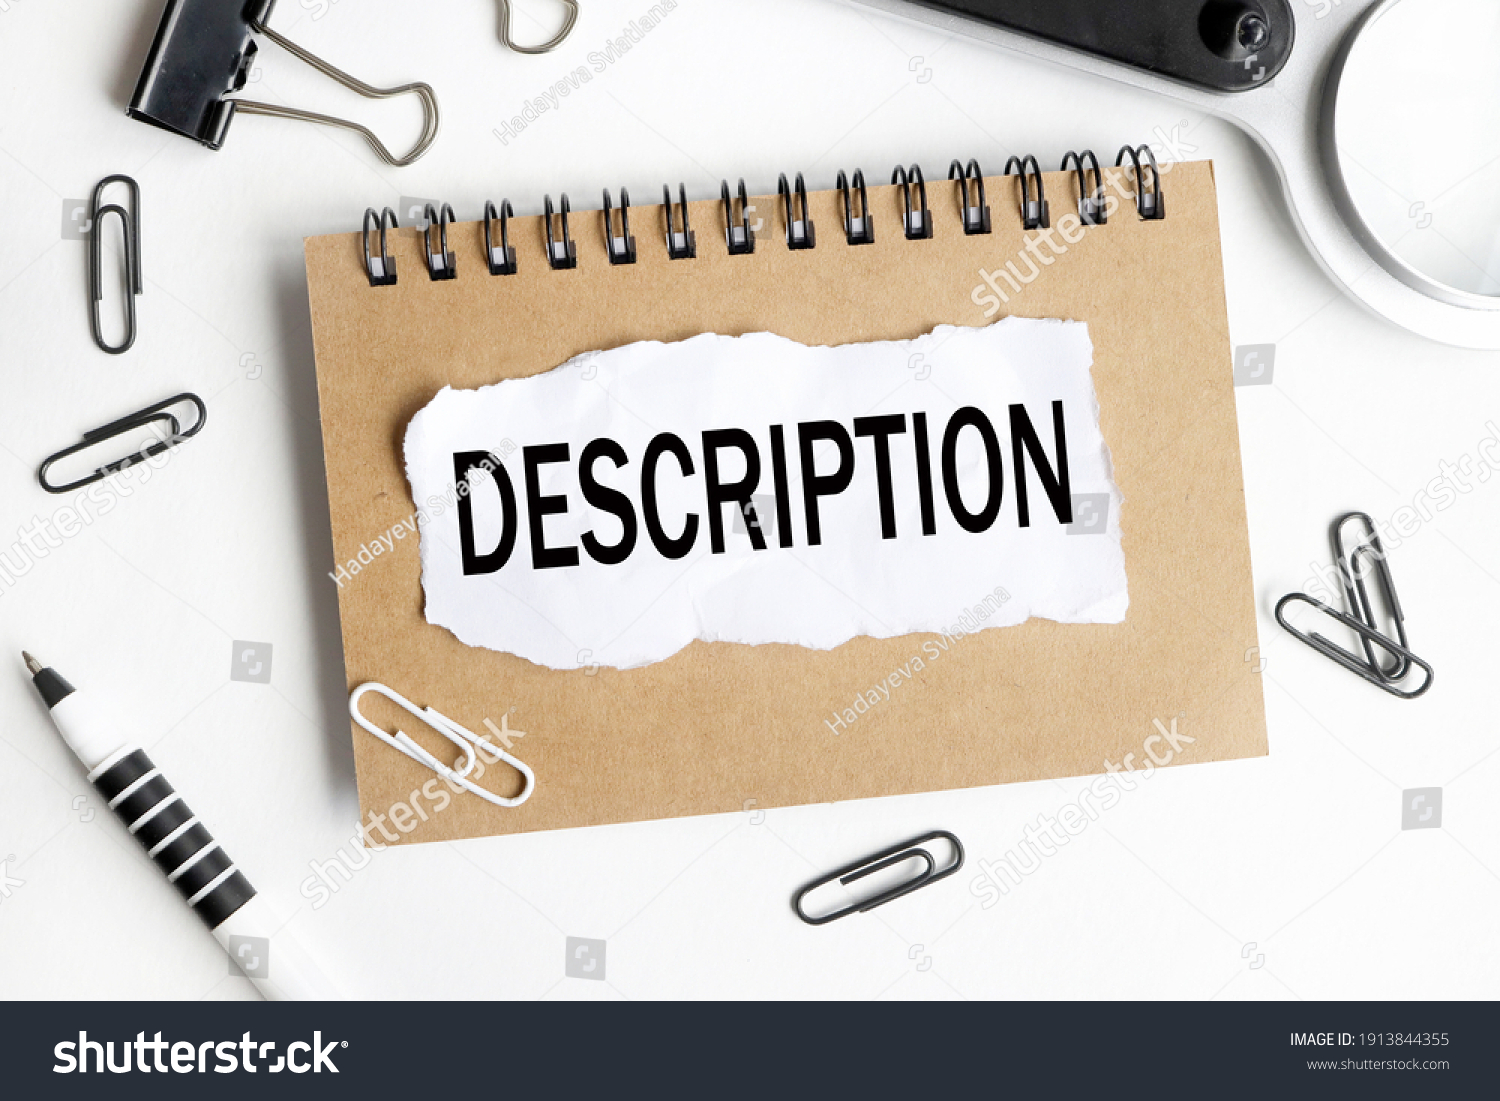 DESCRIPTION. text on white paper over white background. notebook, pen. #1913844355